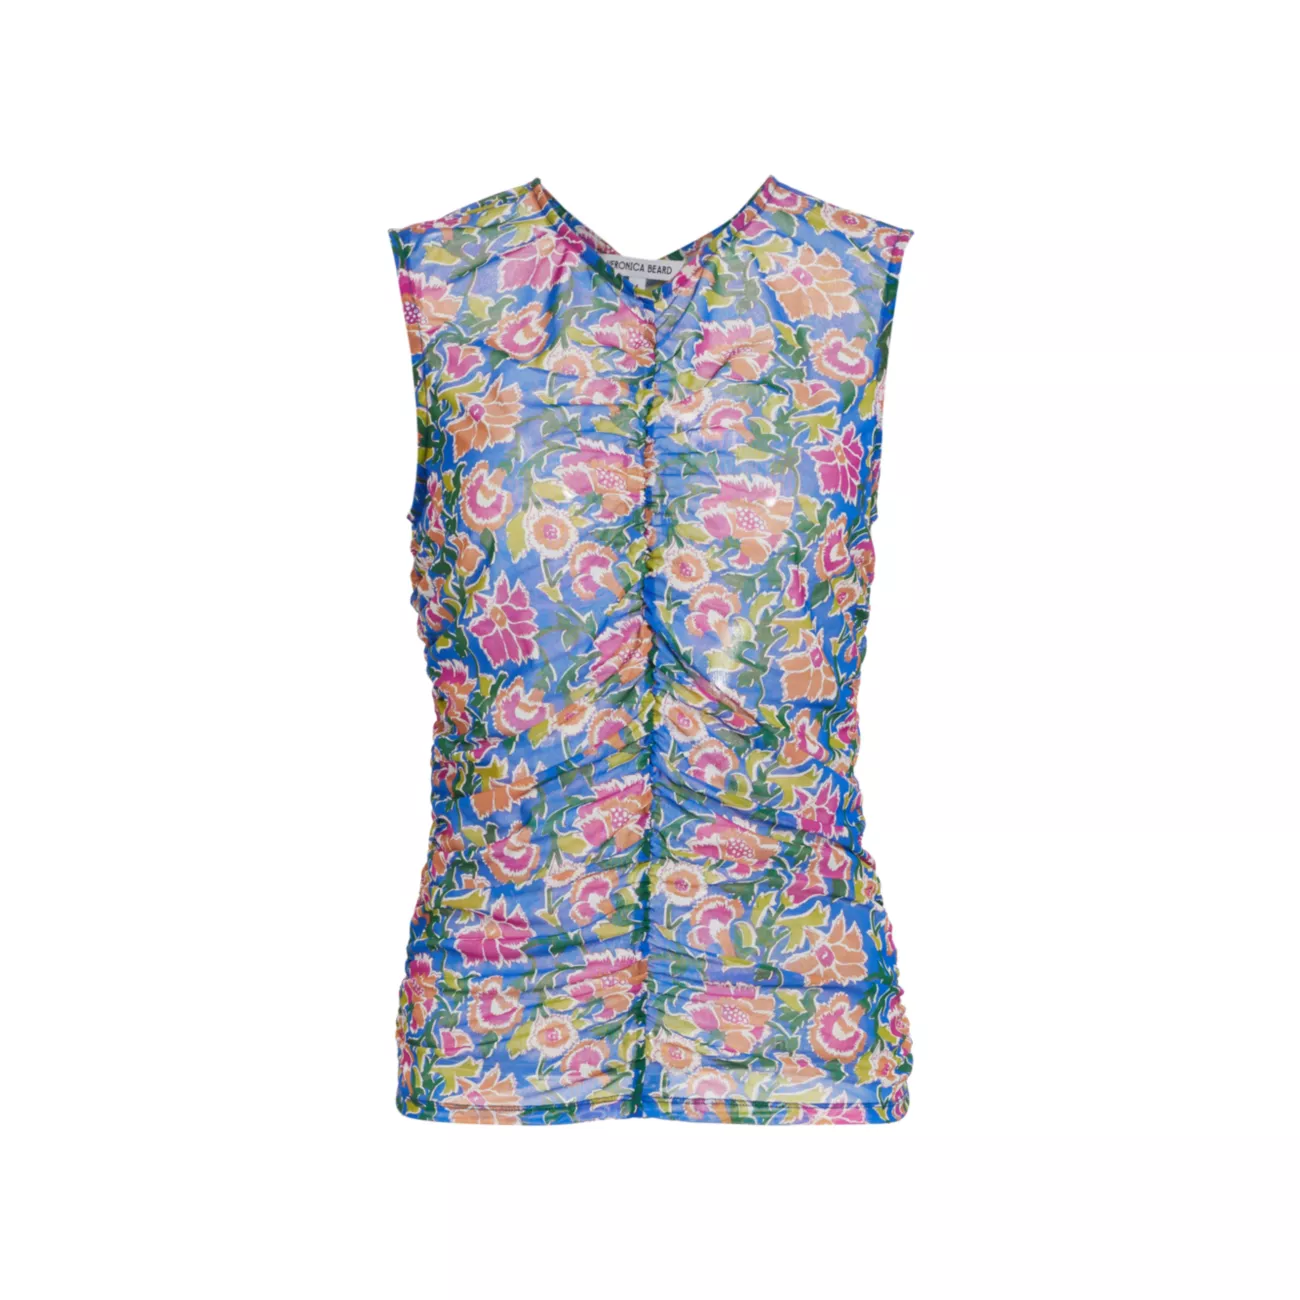 Tazmin Ruched Floral Mesh Top VERONICA BEARD